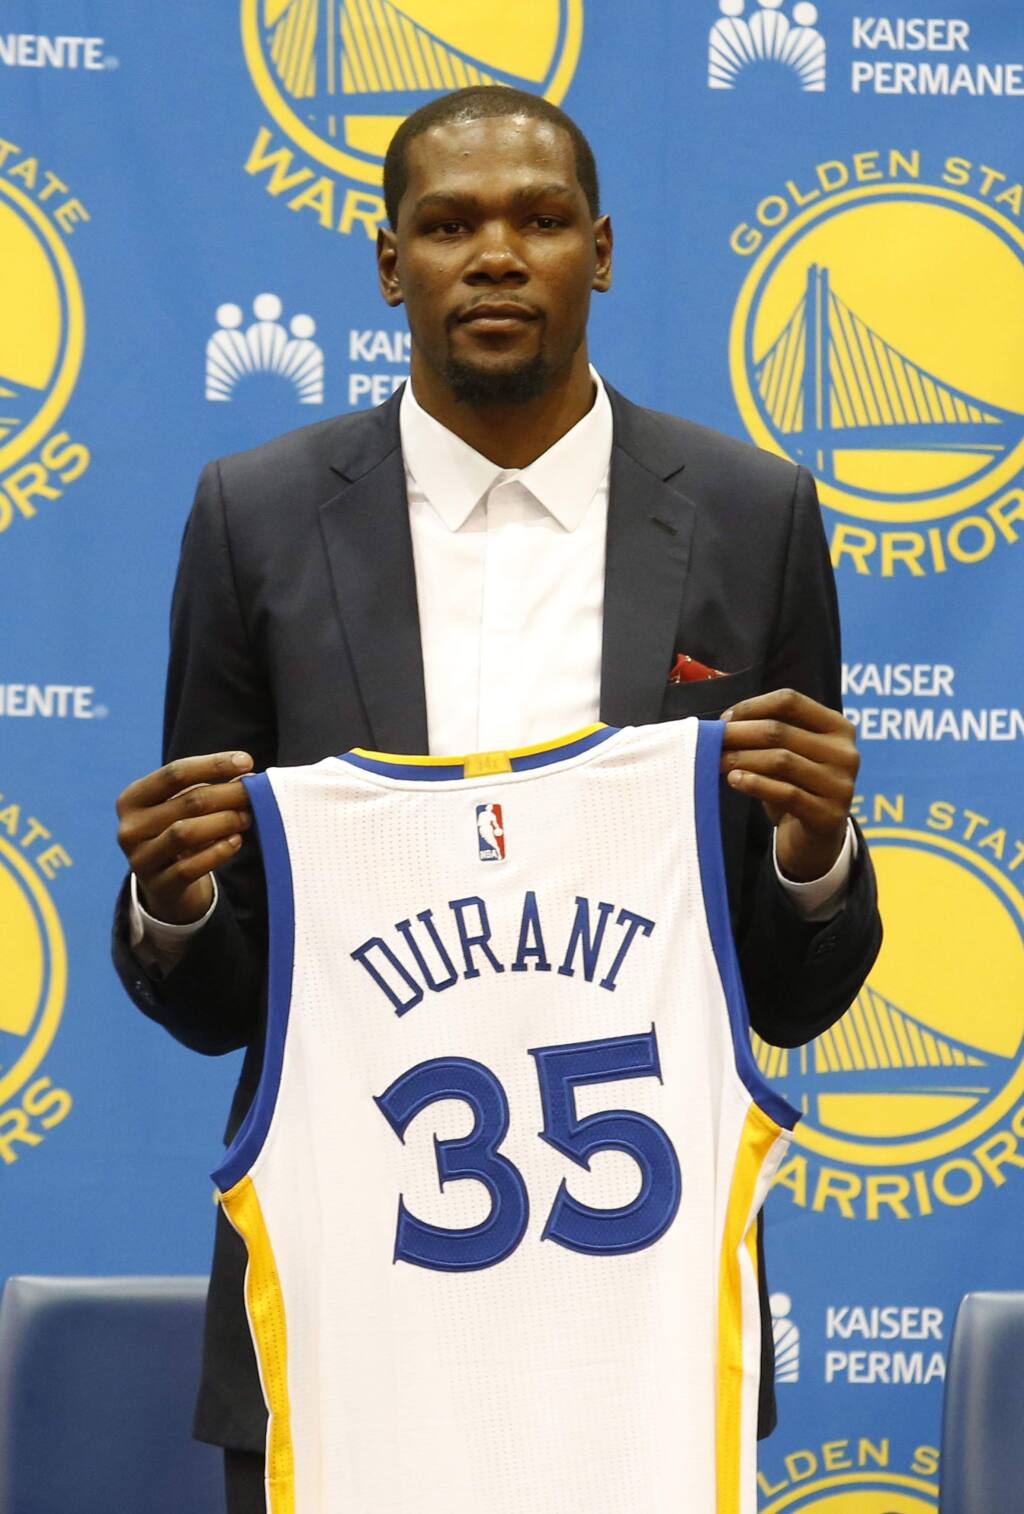 Warriors announce they'll retire Kevin Durant's No. 35 jersey in